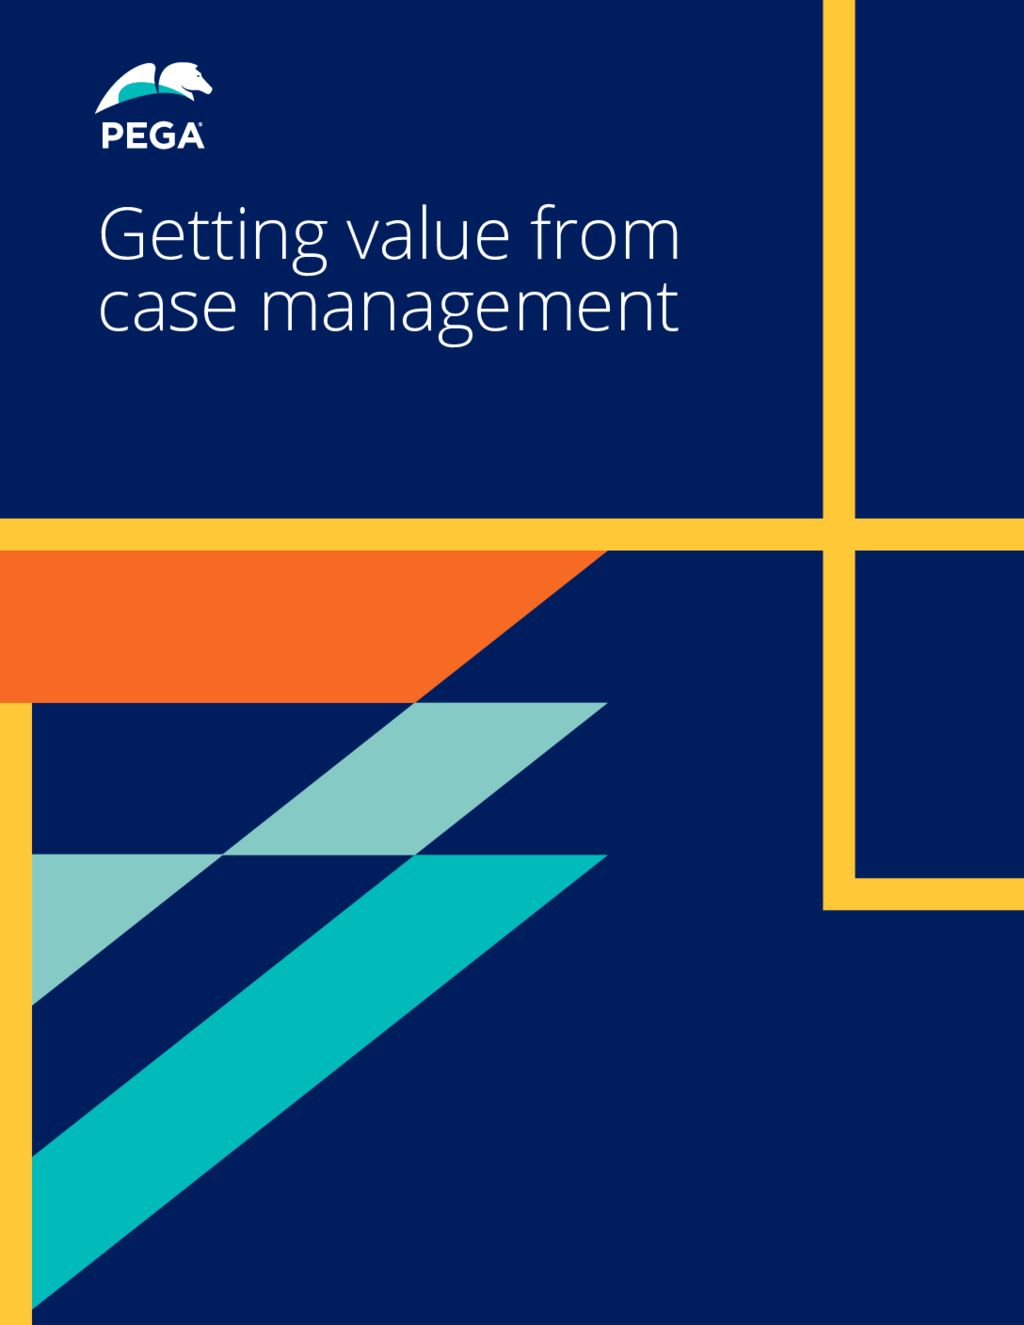 How logistics companies get value from case management